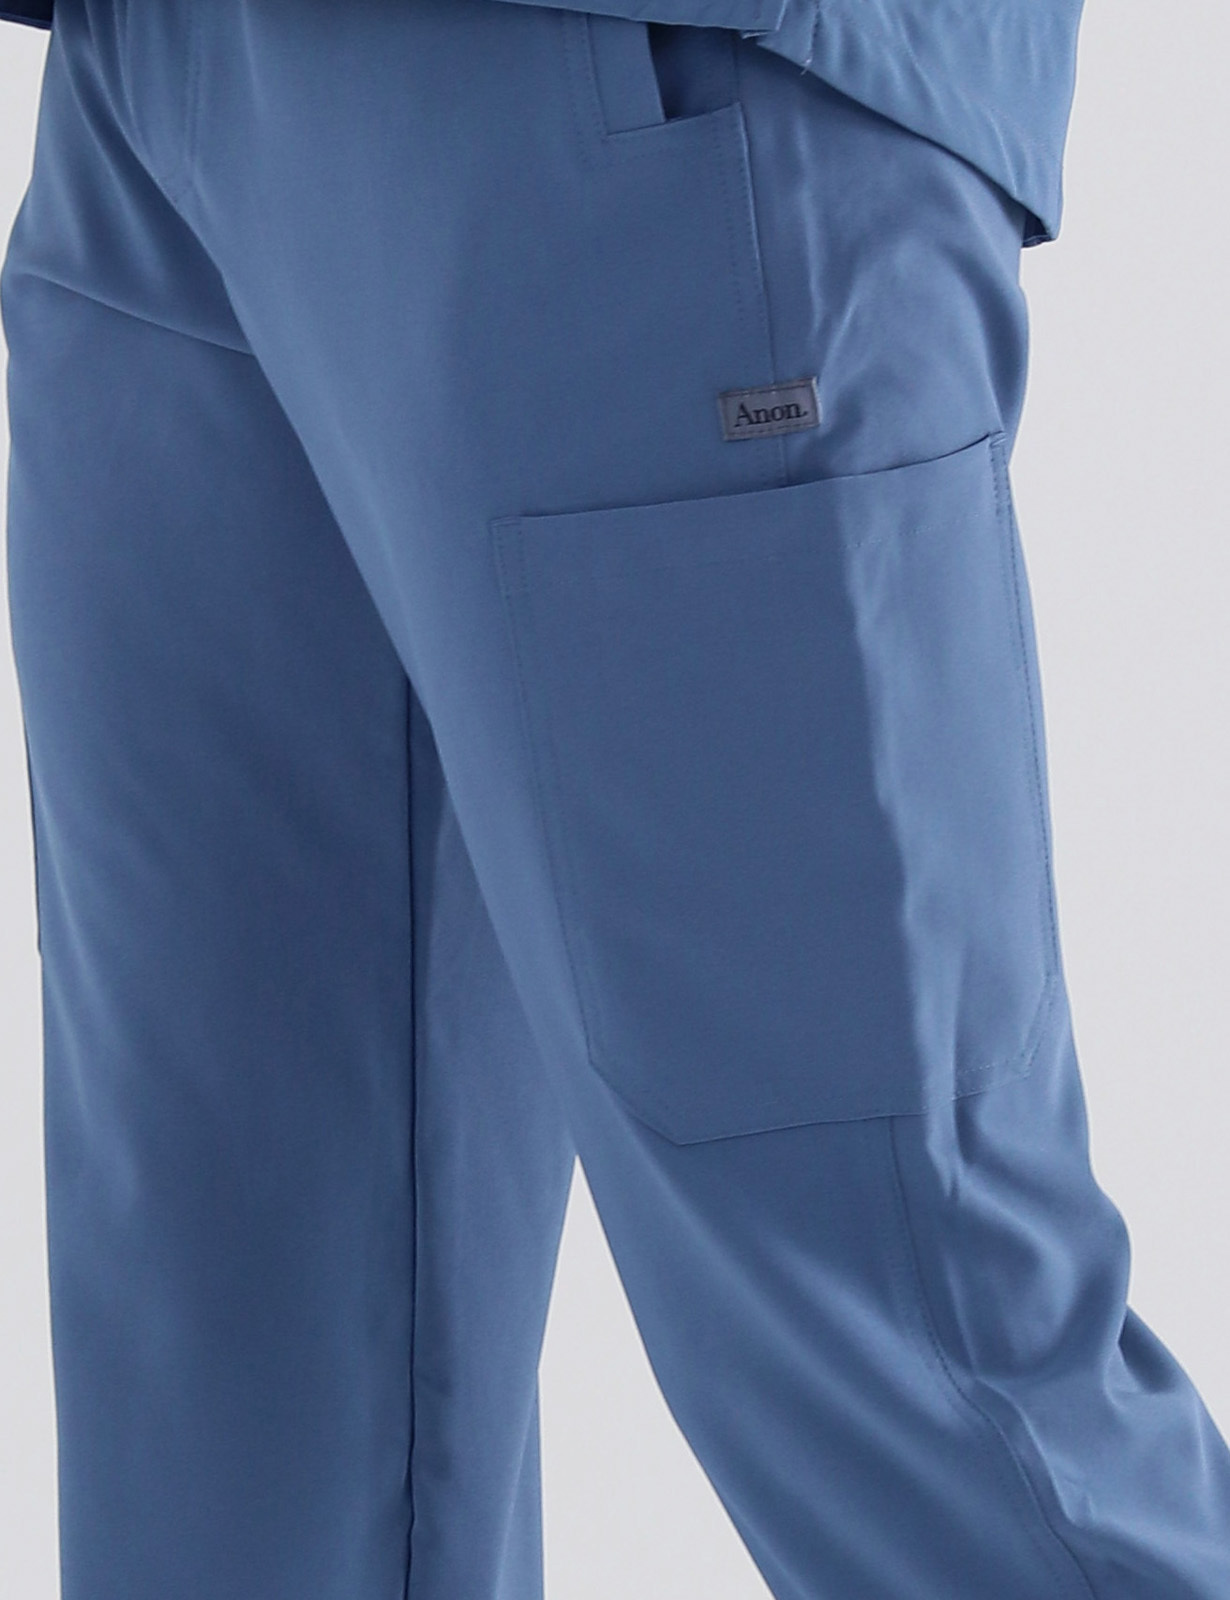 Anon Men's Scrub Pants (Stealth Collection) Poly/Spandex - Steel Blue